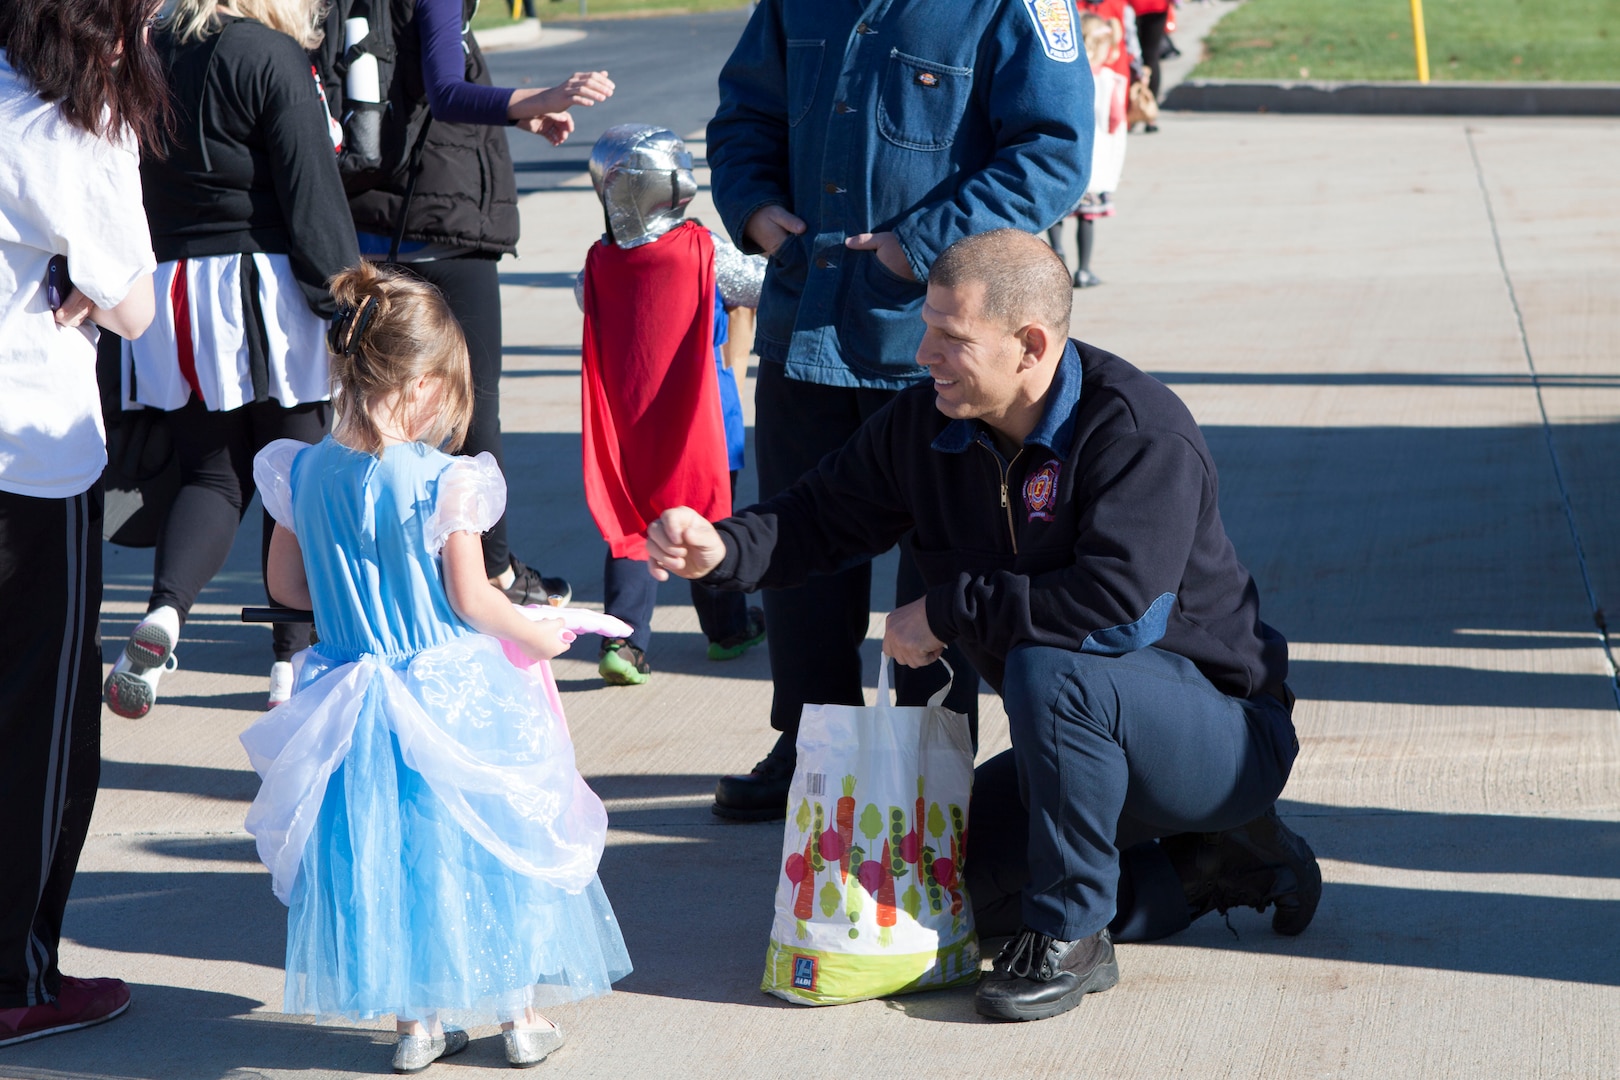 Members of the DLA Distribution Susquehanna, Pa., fire department hand out candy to the children of the Child Development Center during the annual Halloween parade on October 31.